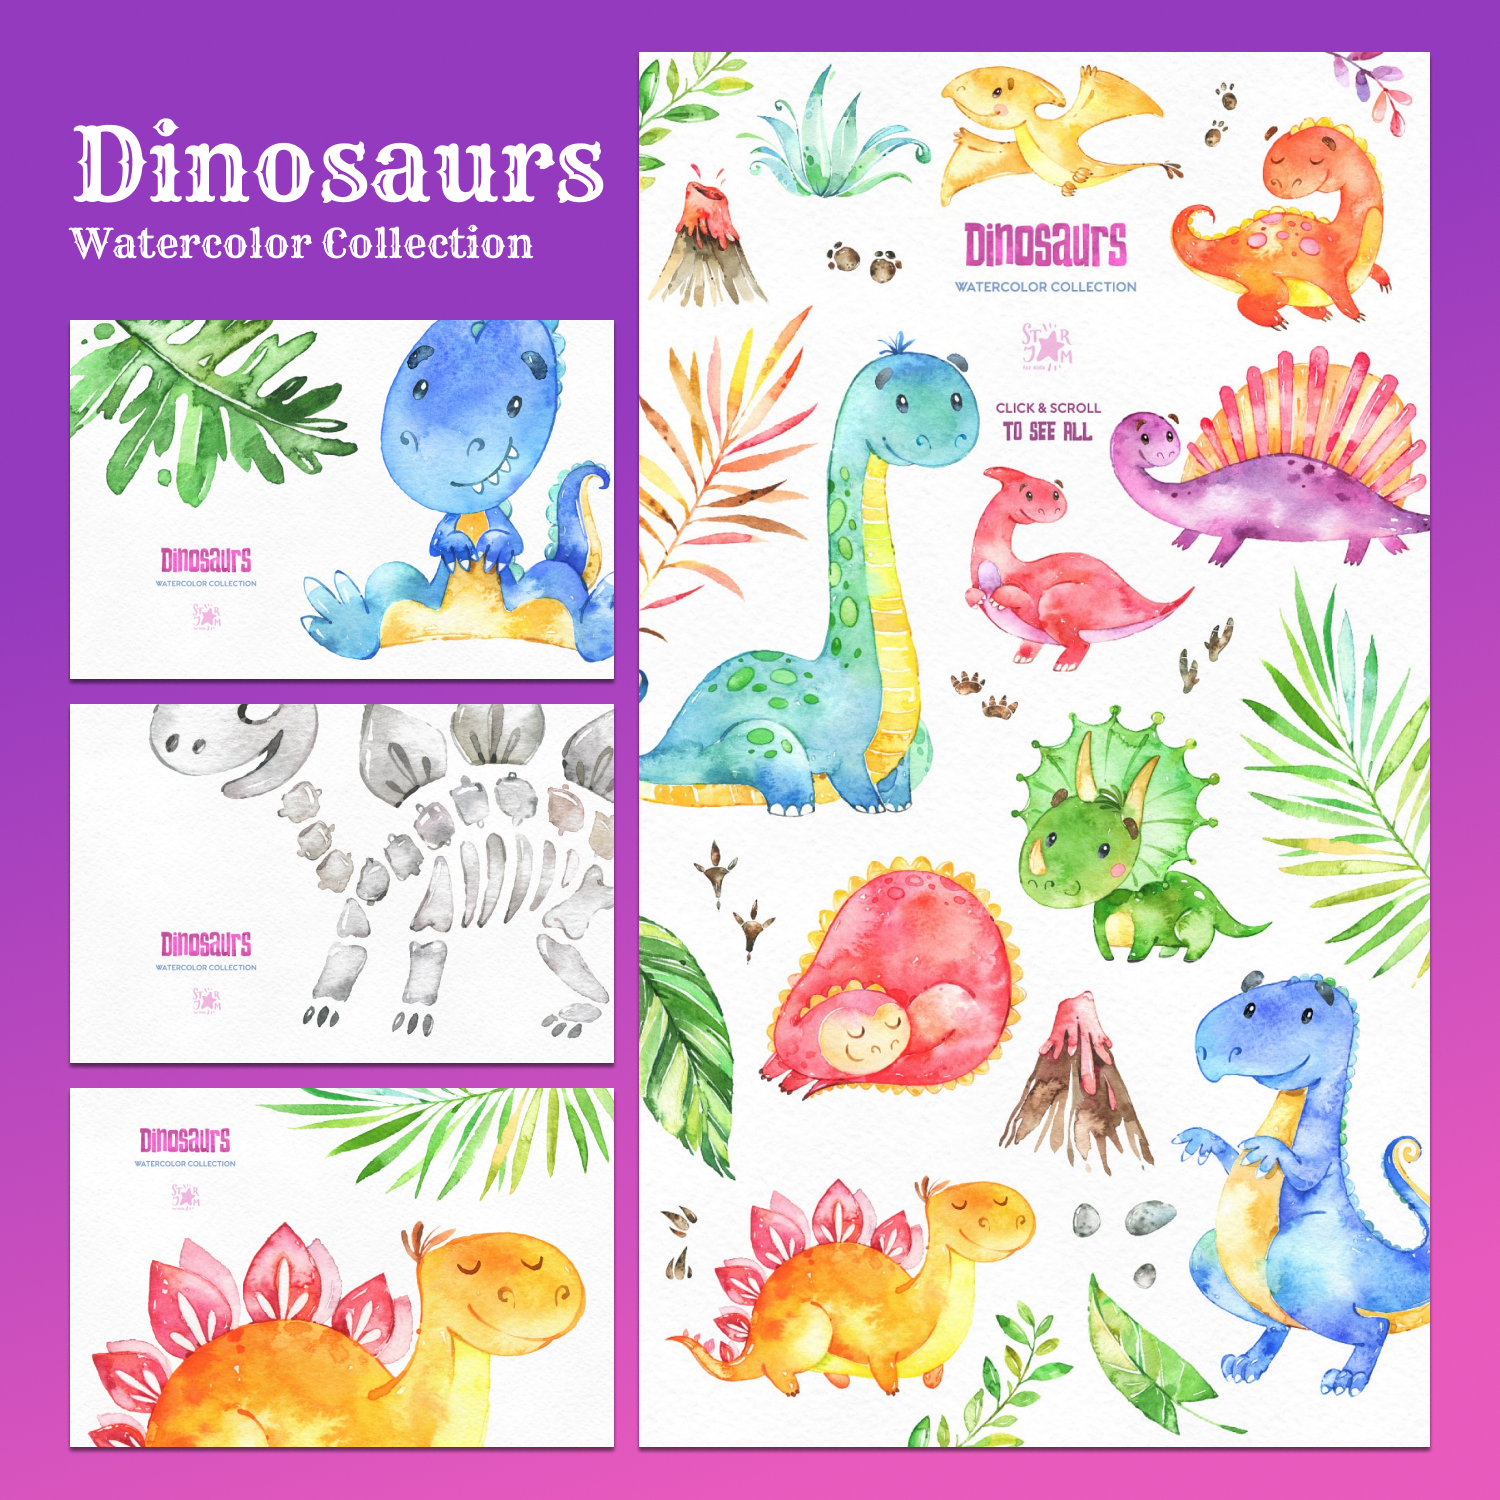 Dinosaurs Watercolor Hand Drawn Collection cover image.